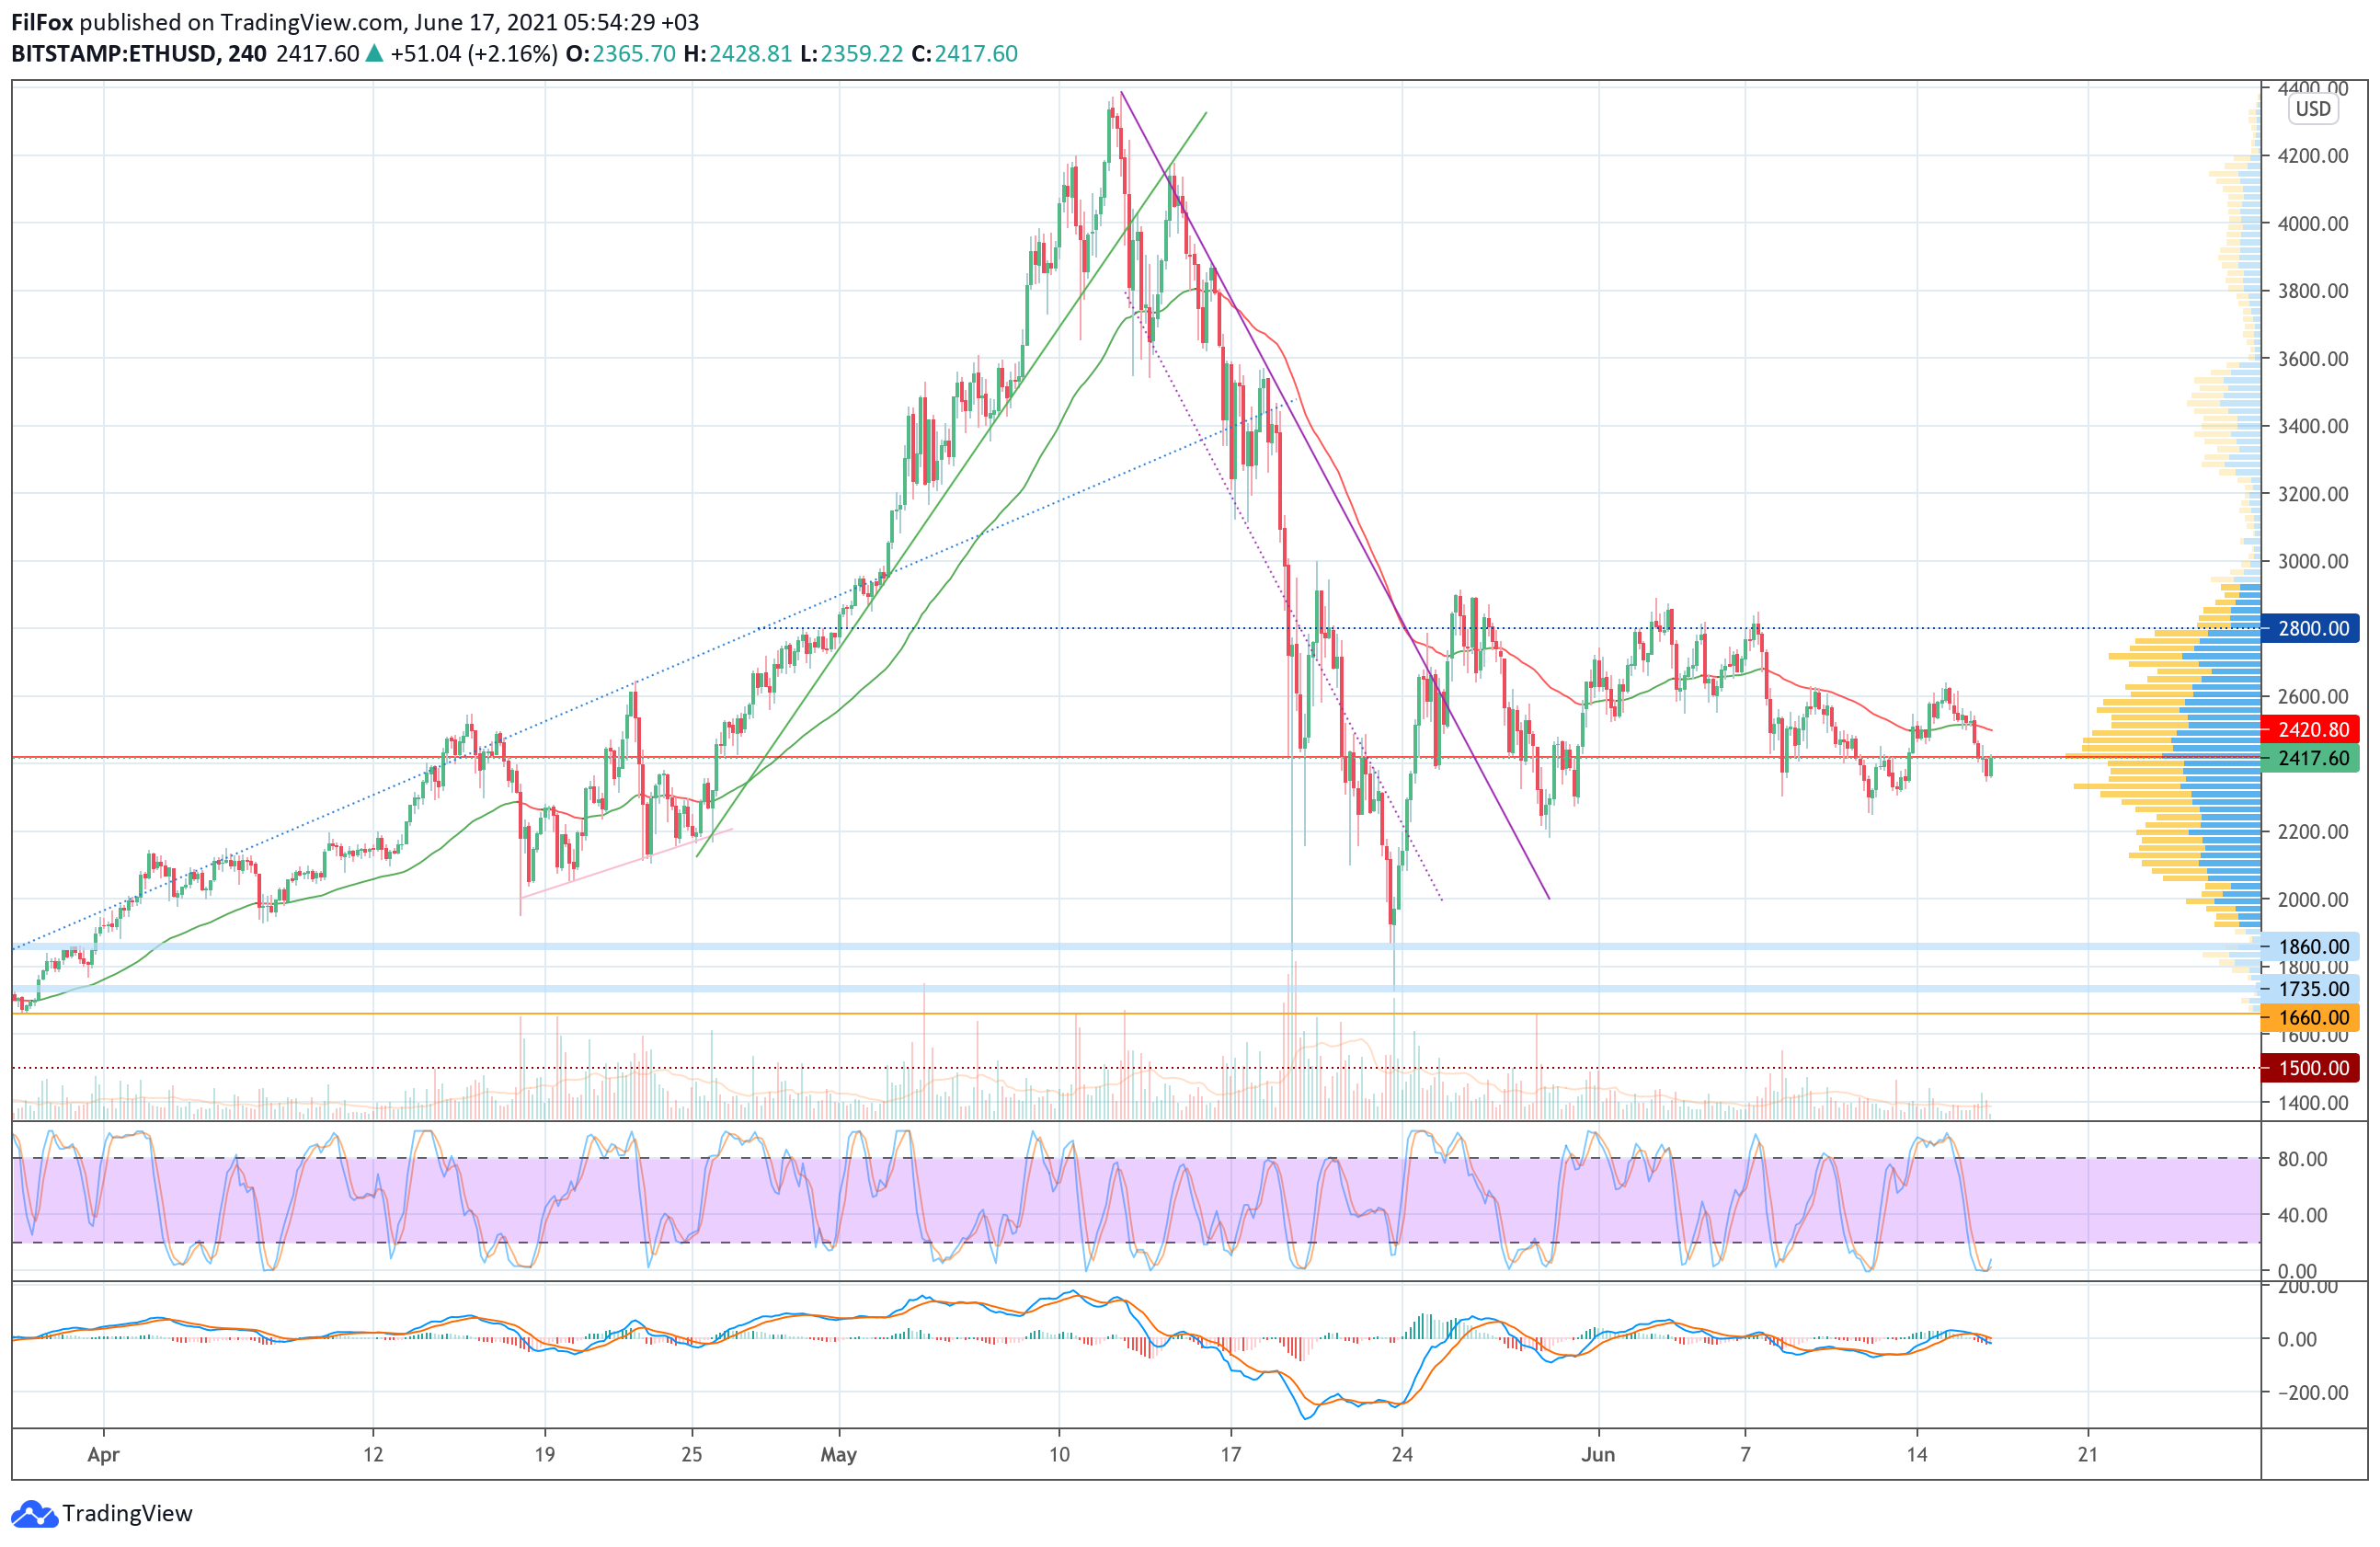 Analysis of the prices of Bitcoin, Ethereum, XRP for 06/17/2021